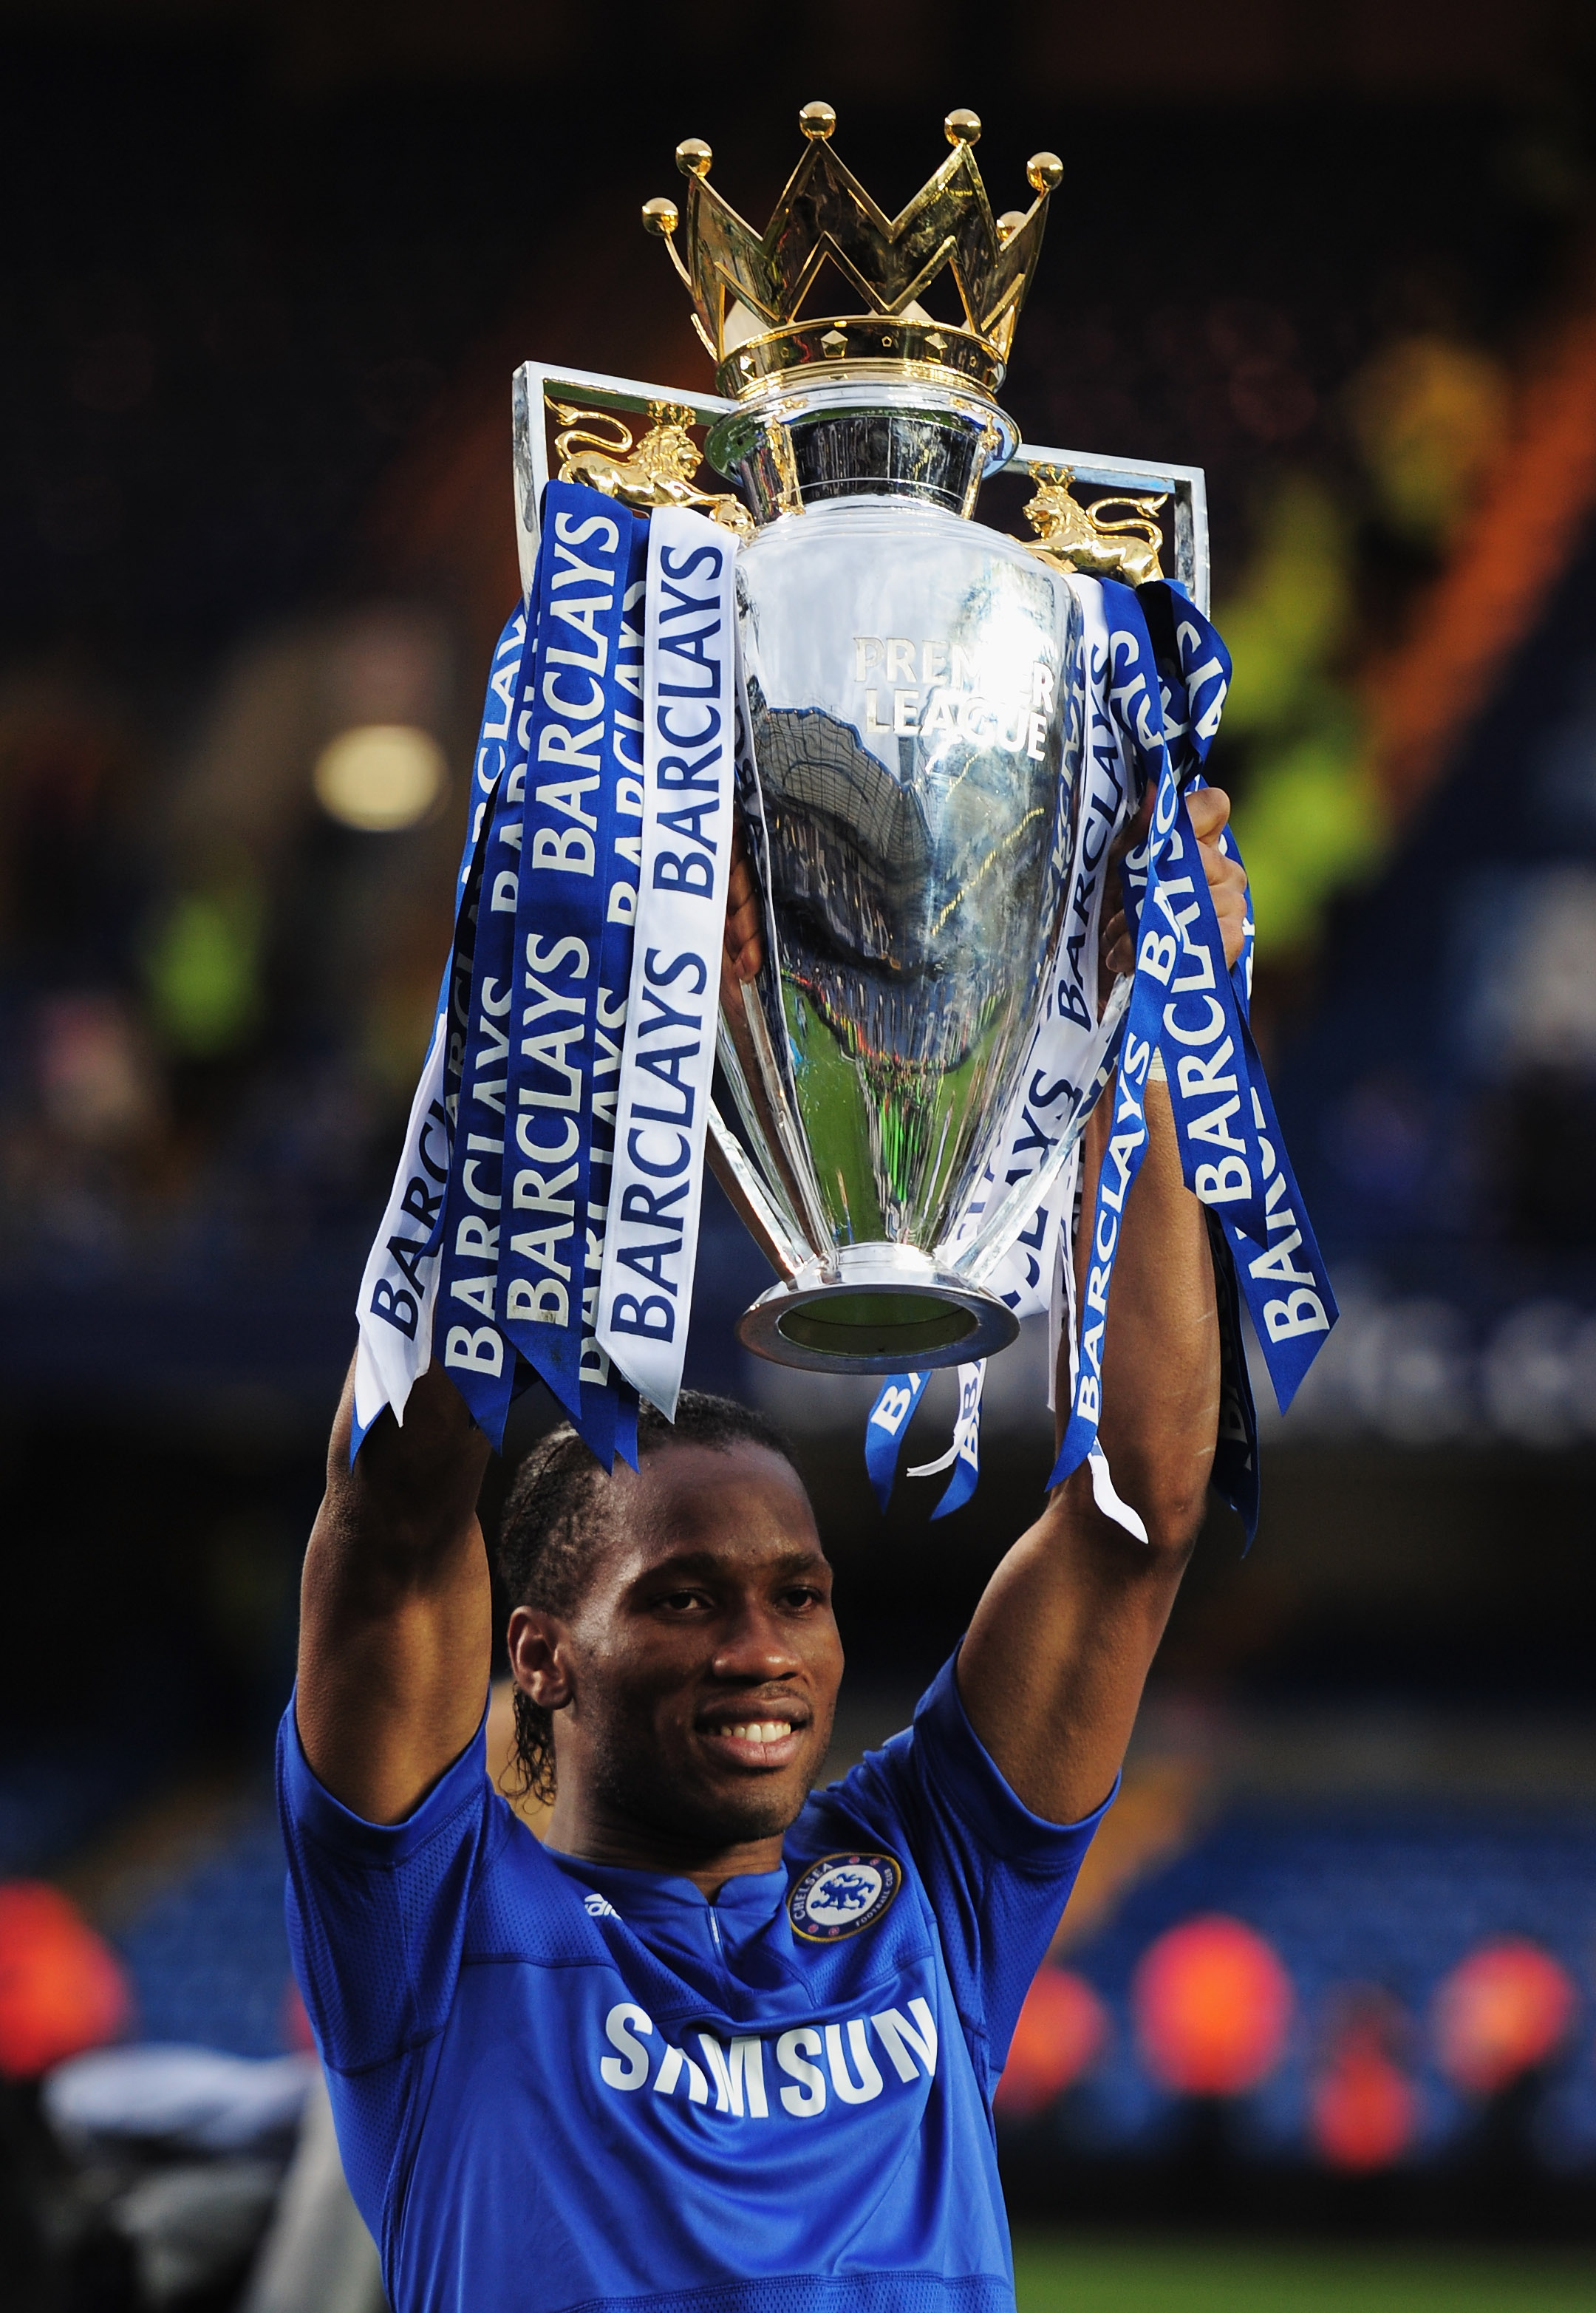 LONDON, ENGLAND - MAY 09:  Didier Drogba of Chelsea celebrates with the trophy as they win the title after the Barclays Premier League match between Chelsea and Wigan Athletic at Stamford Bridge on May 9, 2010 in London, England. Chelsea won 8-0 to win th